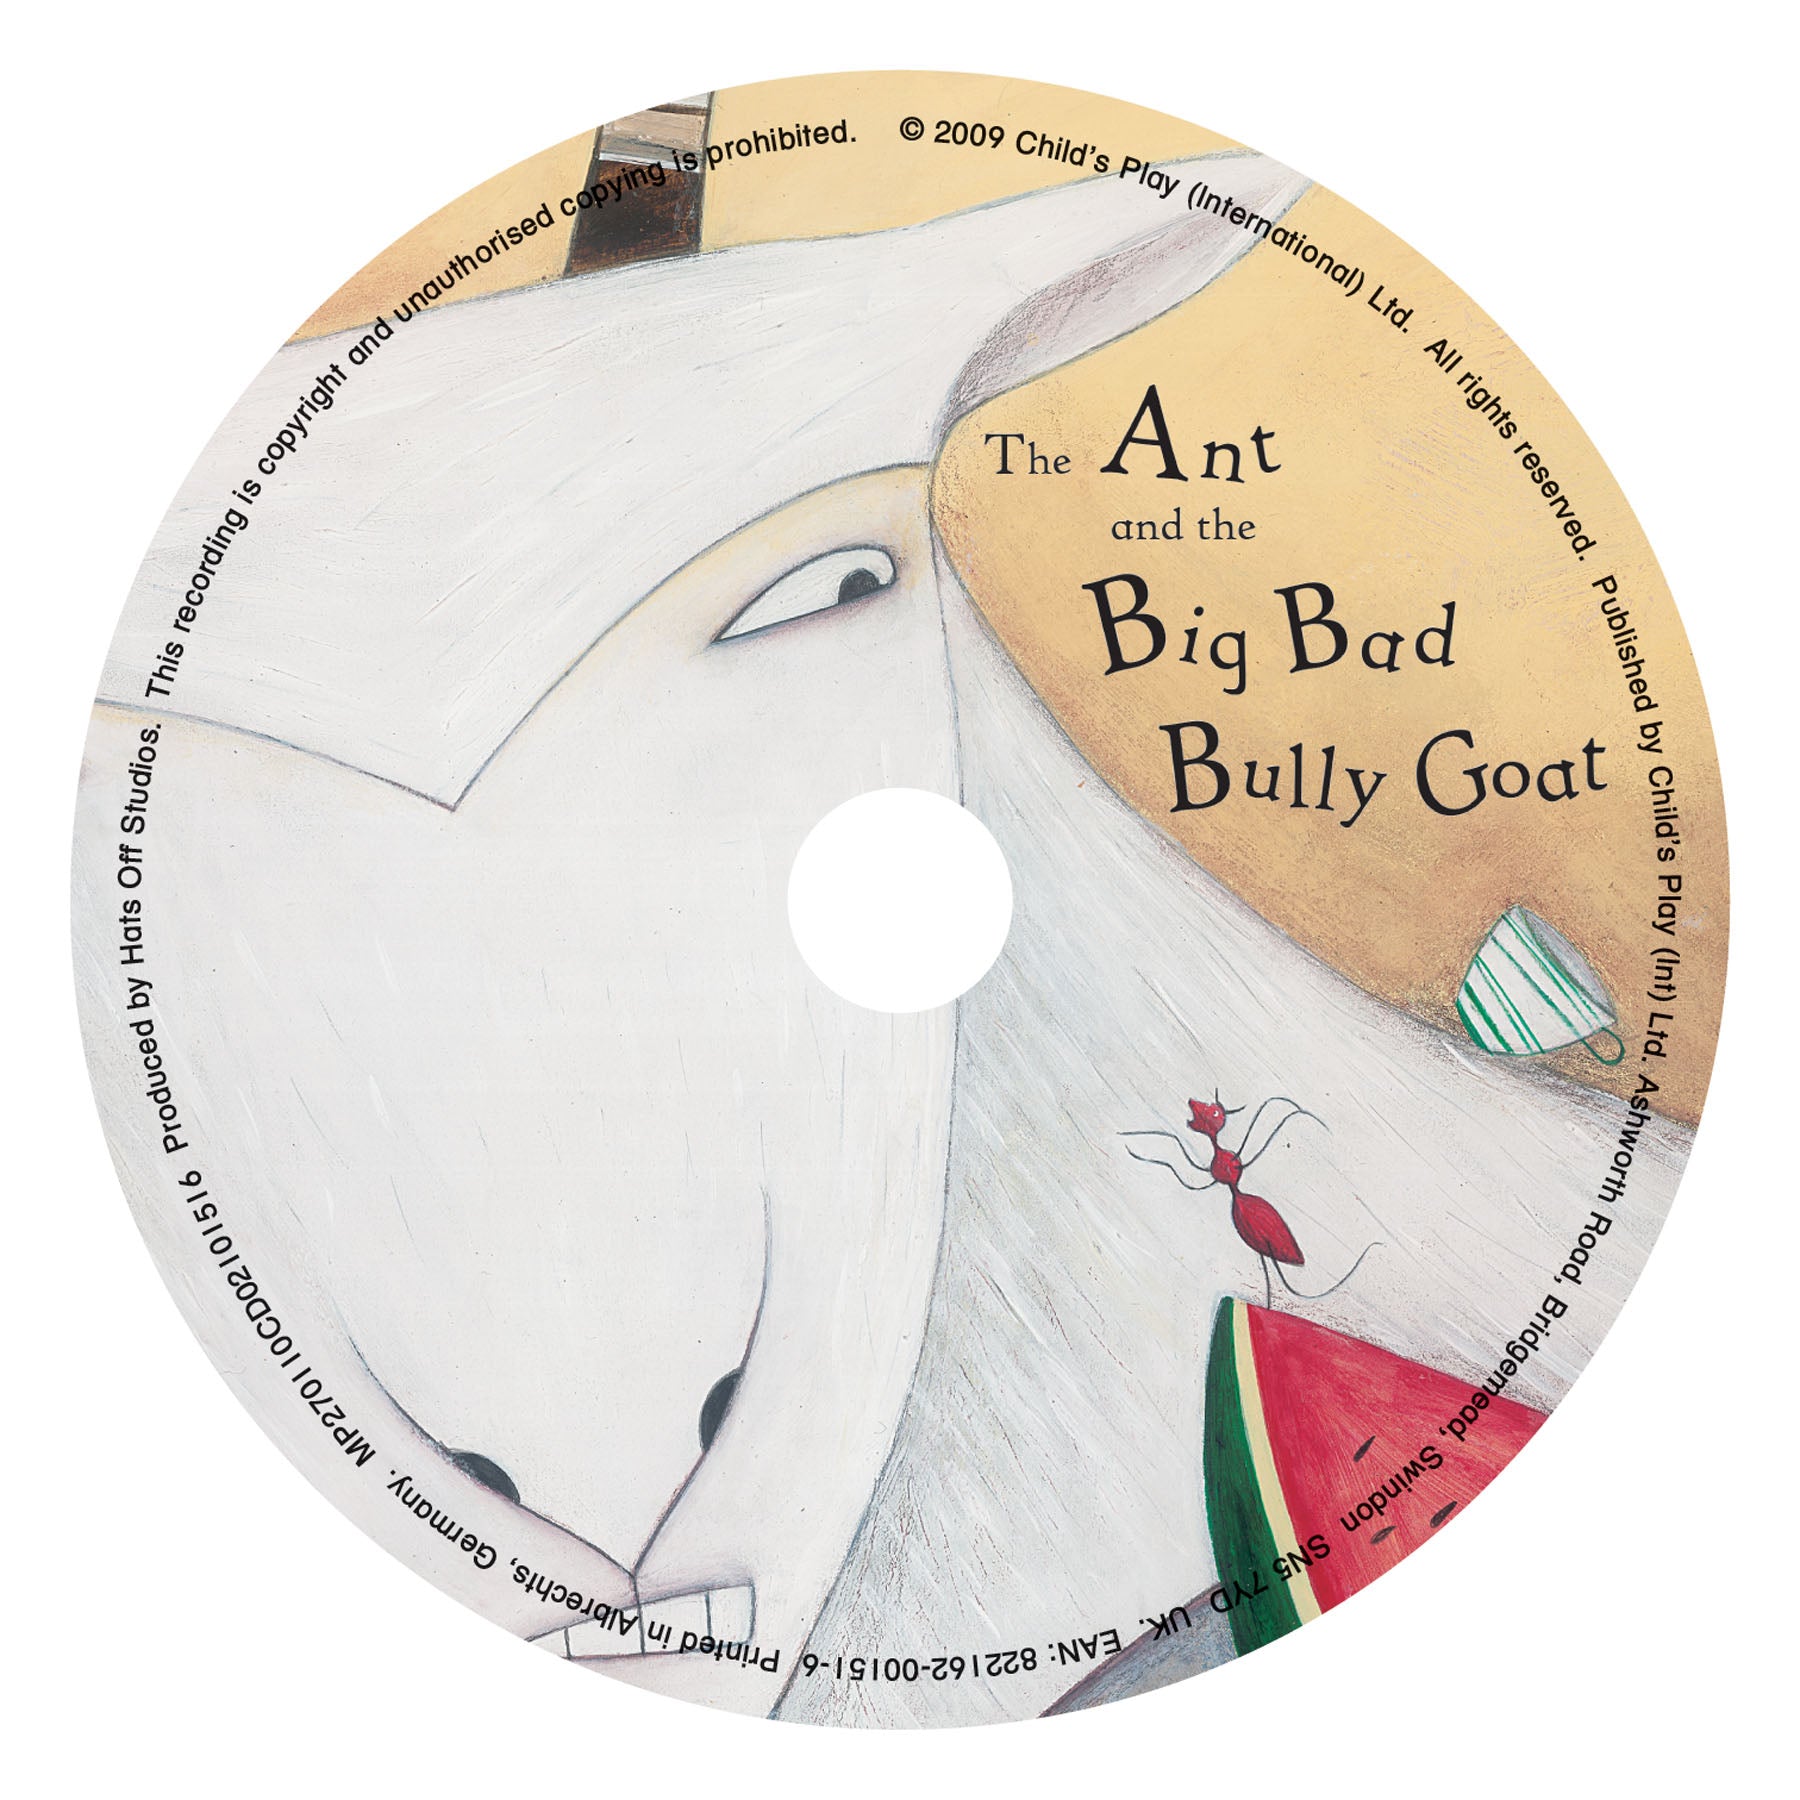 The Ant and the Big Bad Bully Goat CD